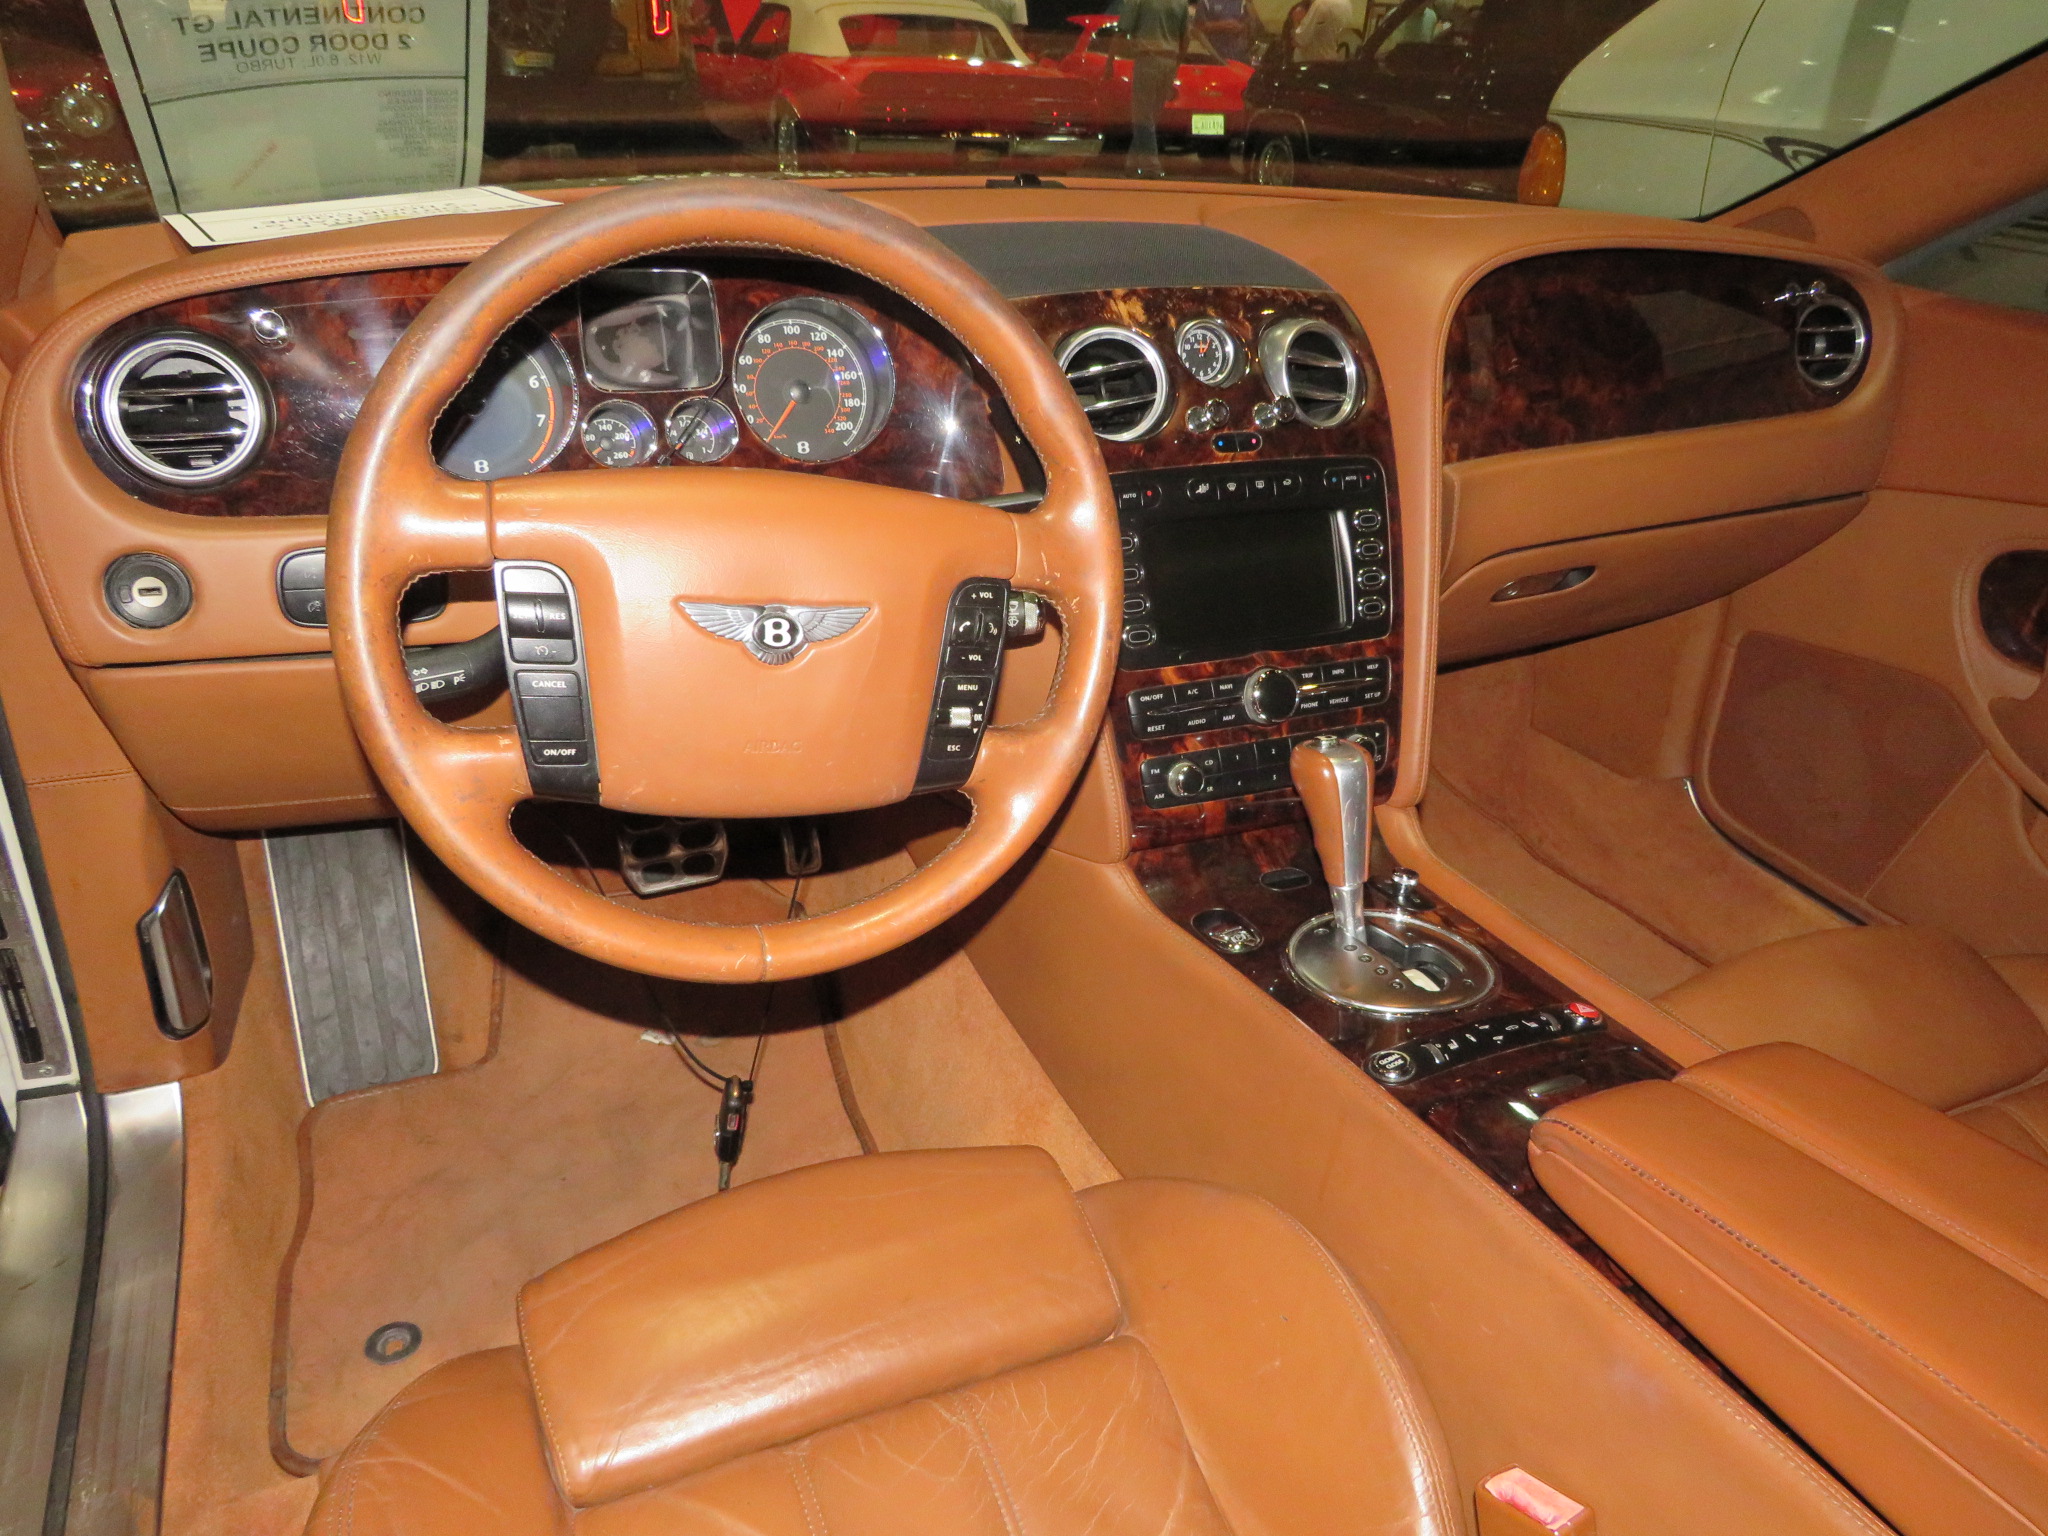 4th Image of a 2005 BENTLEY CONTINENTAL GT